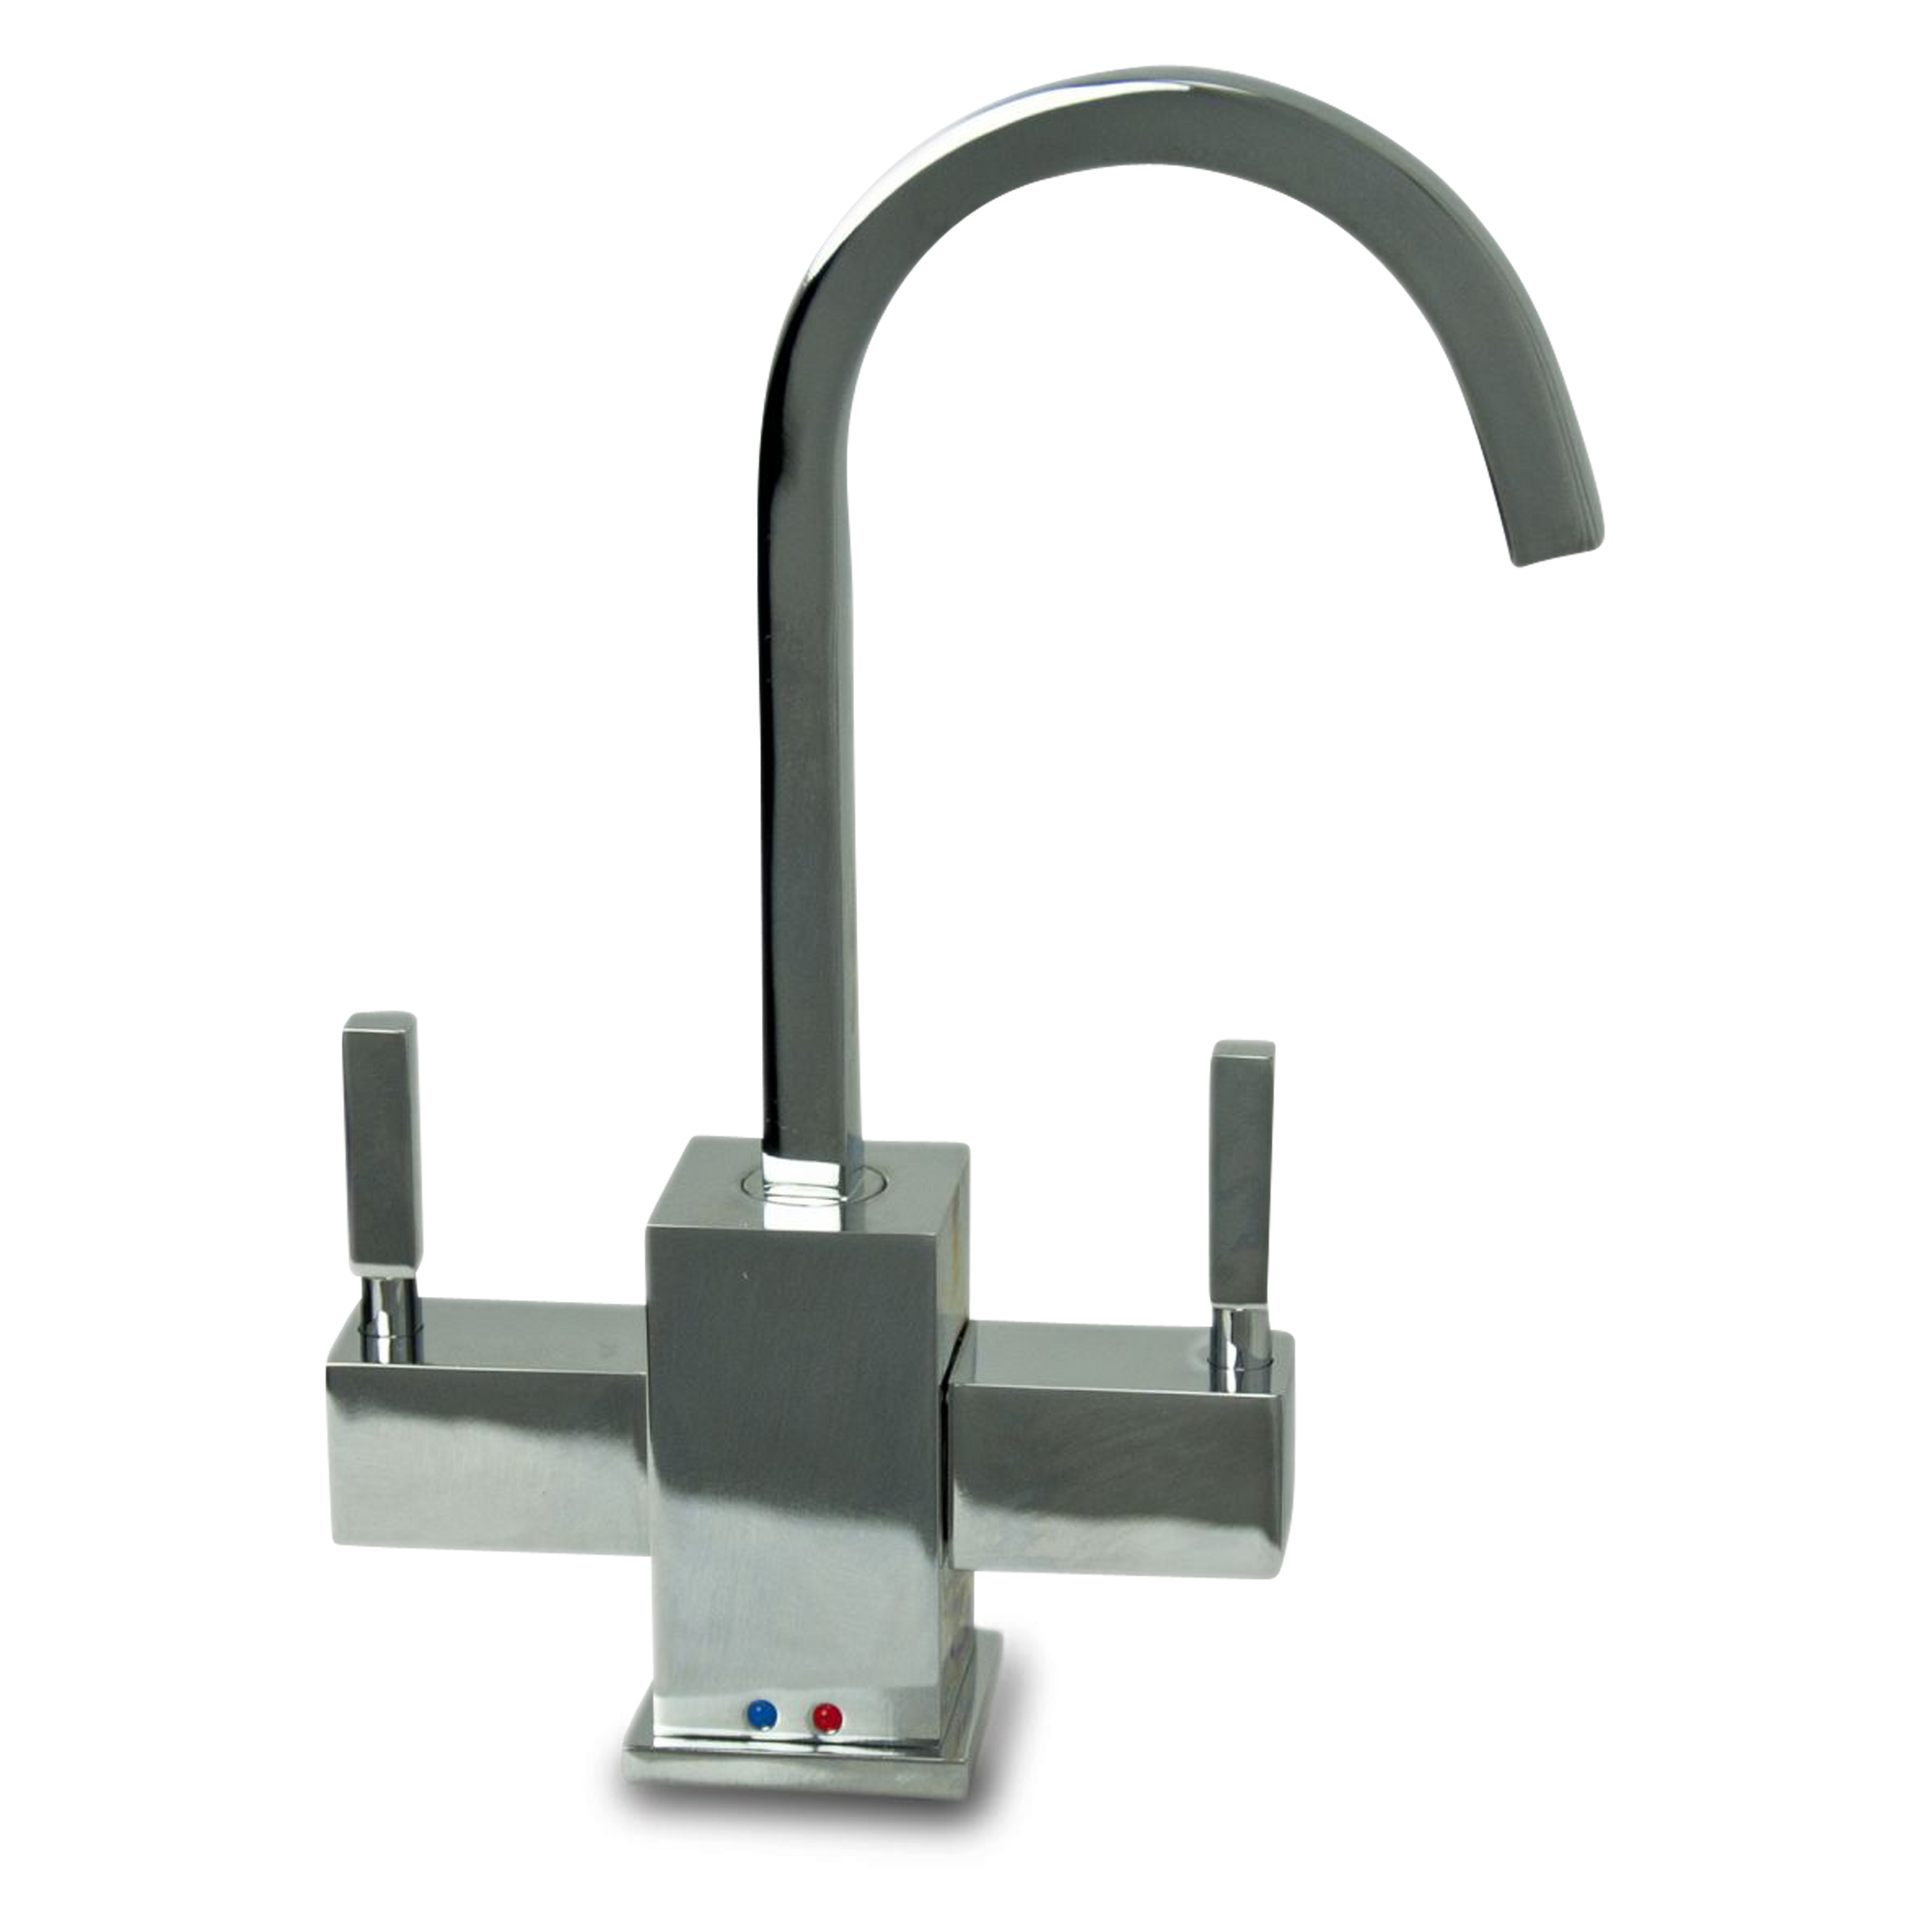 The Little Gourmet instant hot and cold water dispenser is a seamless, modern, no lead faucet with a natural brass finish.